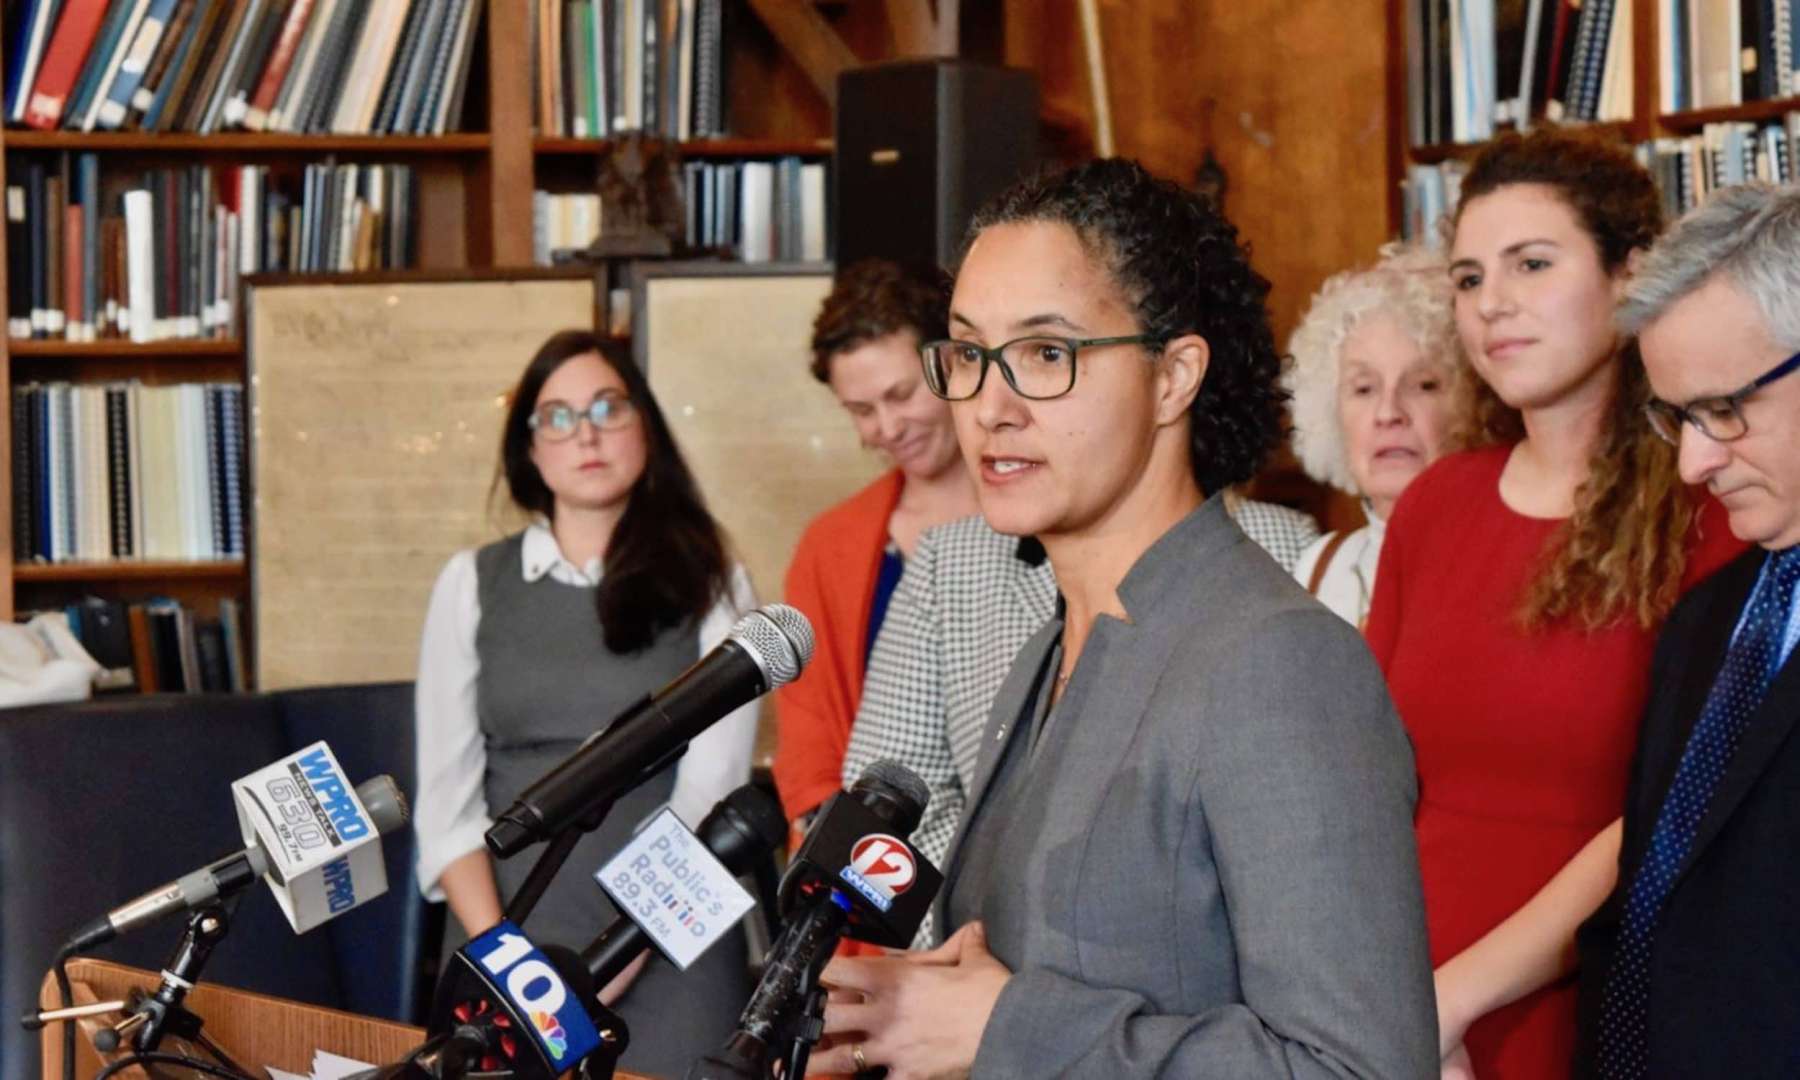 Rhode Island News: Race, ethnicity, gender and disability impact statements could change the conversation at the General Assembly